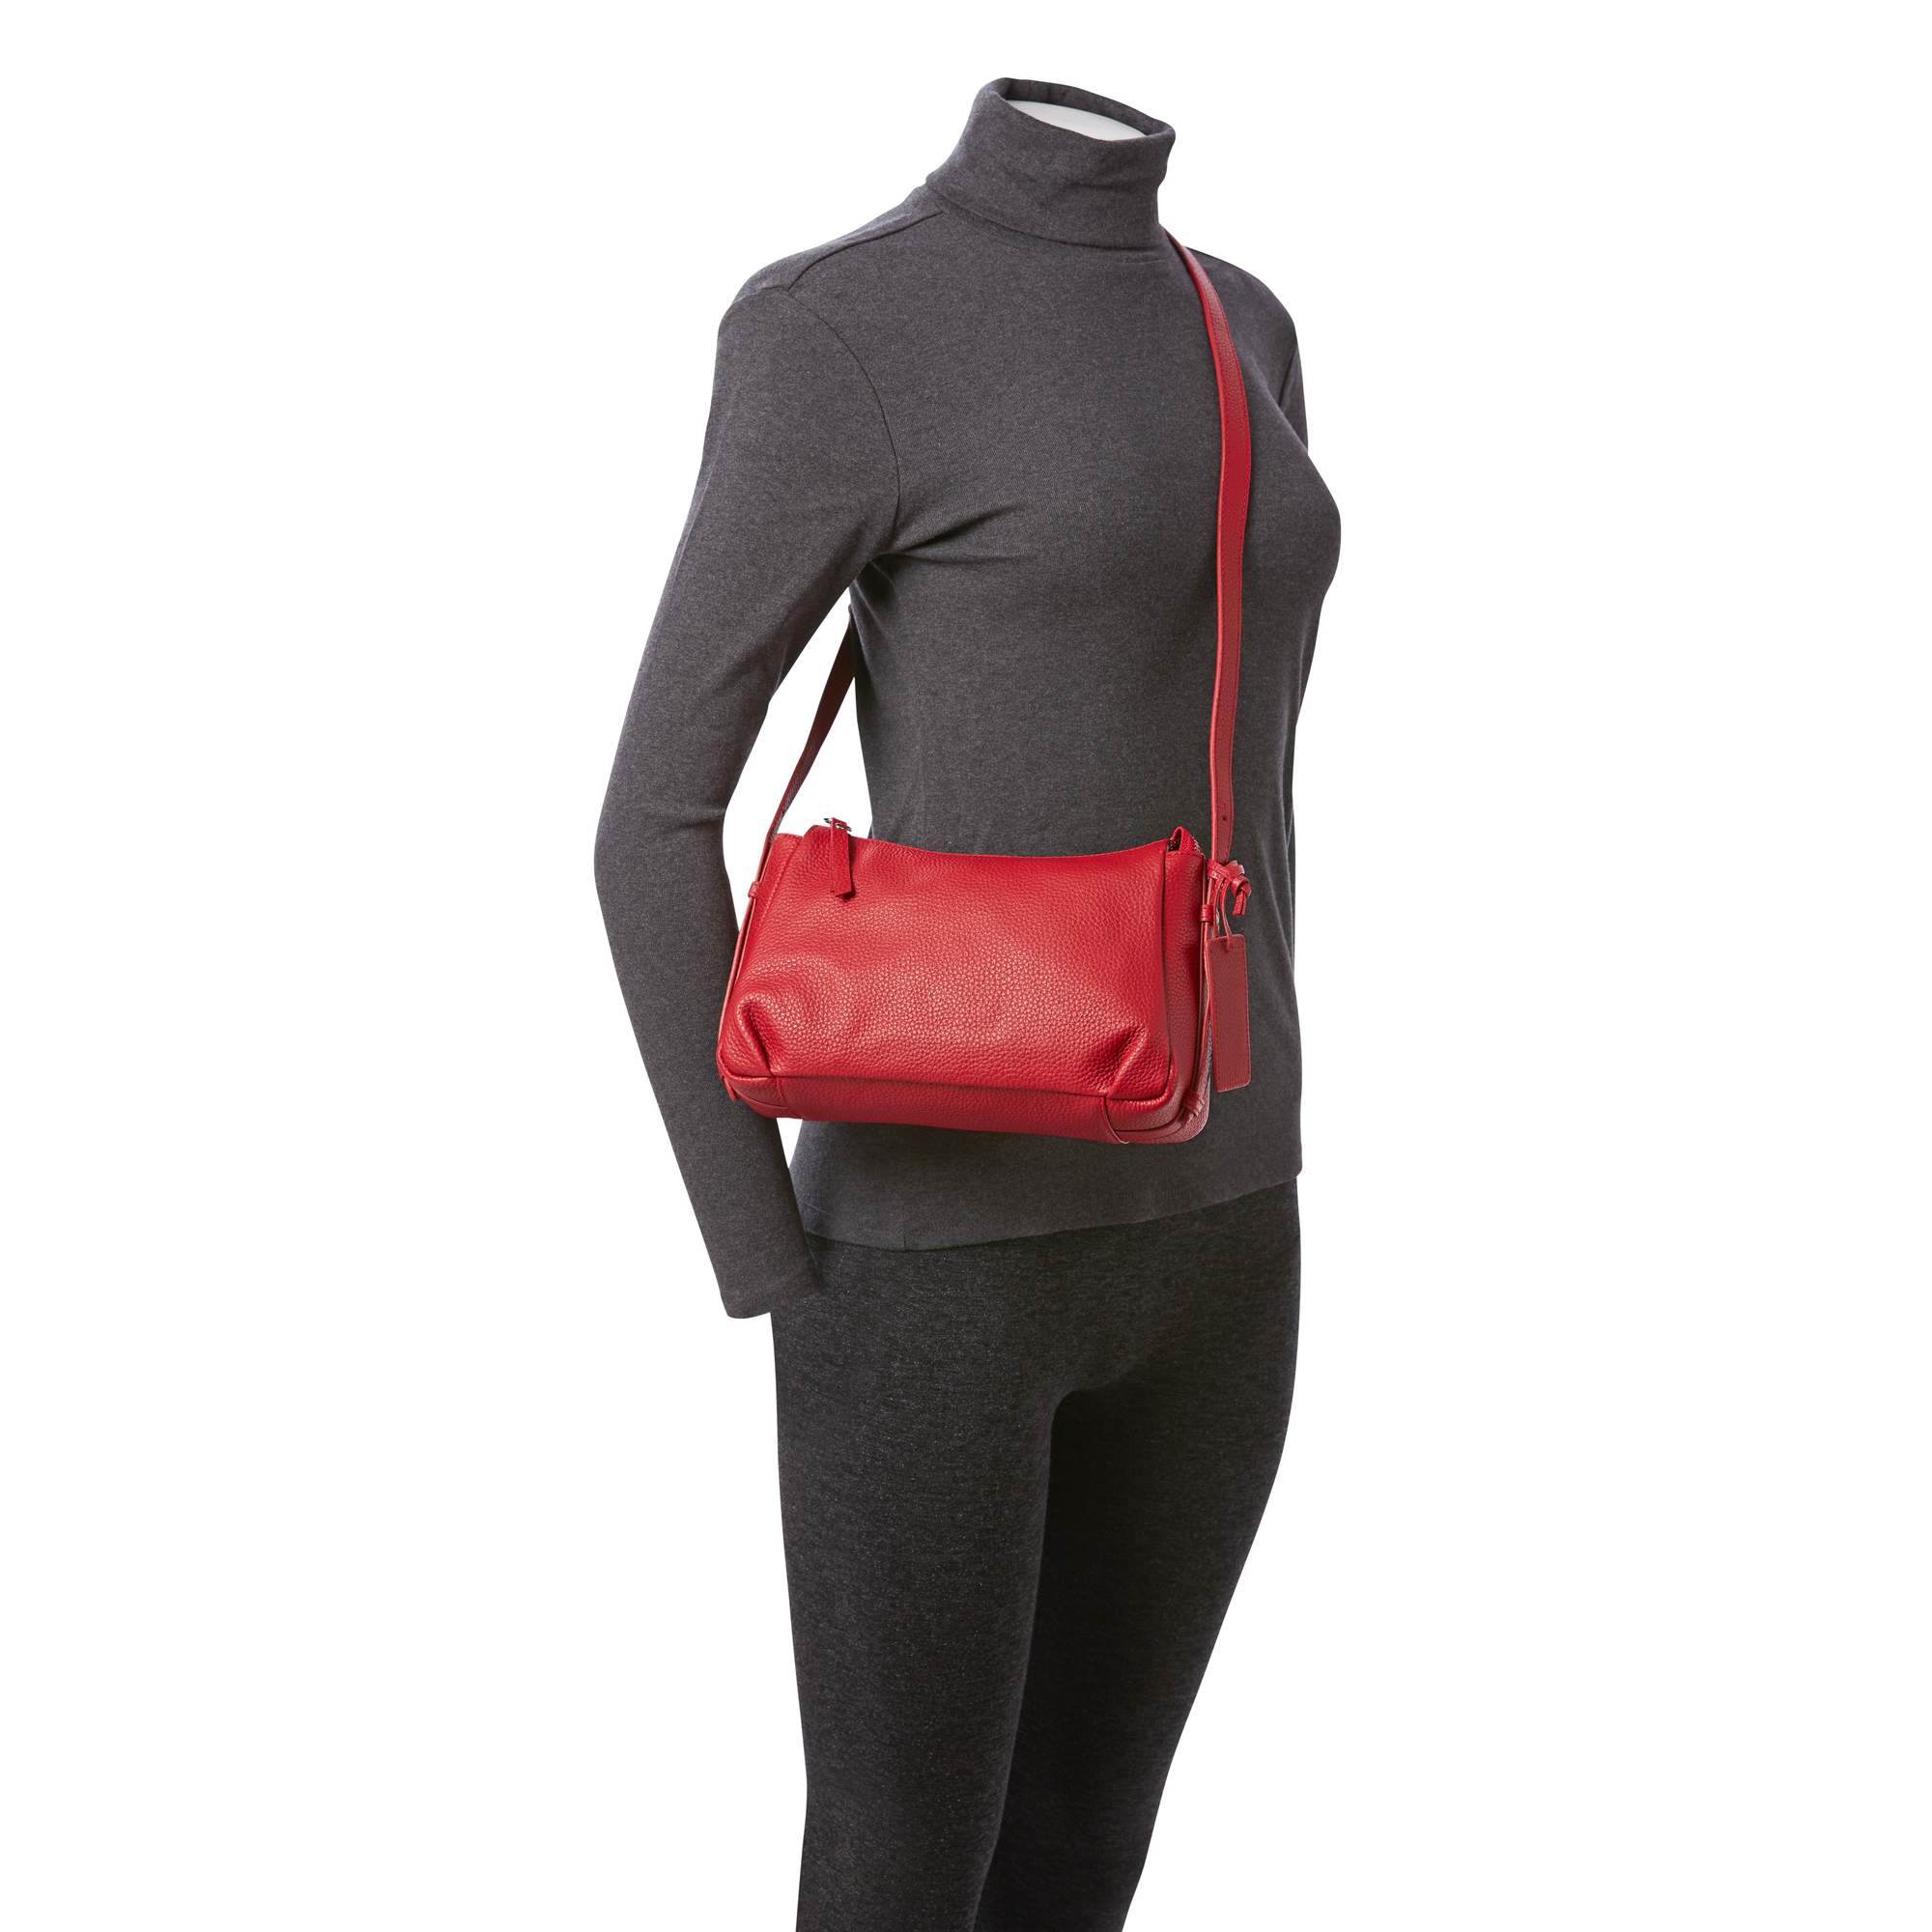 red Charlize crossbody leather purse from Mancini’s Pebbled collection